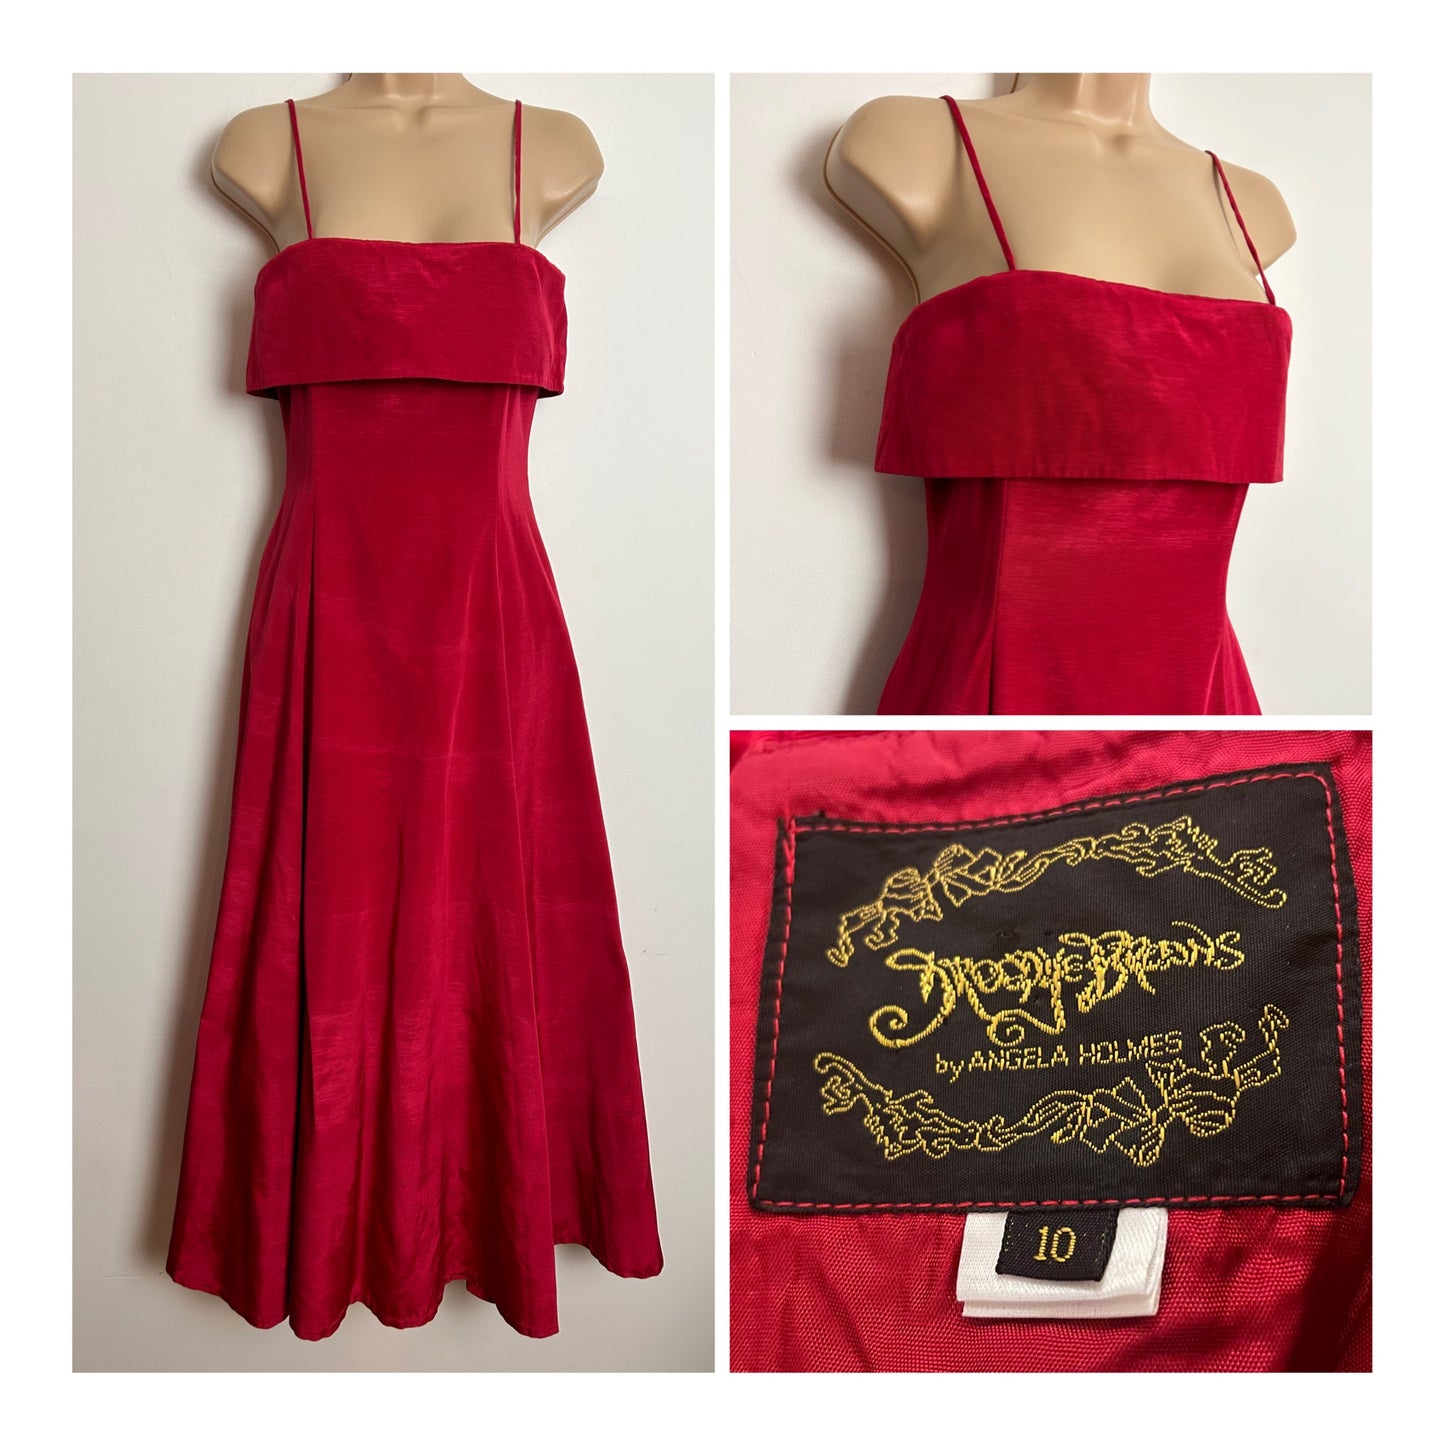 Vintage 1980s DROOPY & BROWNS By Angela Holmes UK Size 8 Red Strappy Flared Maxi Occasion Dress